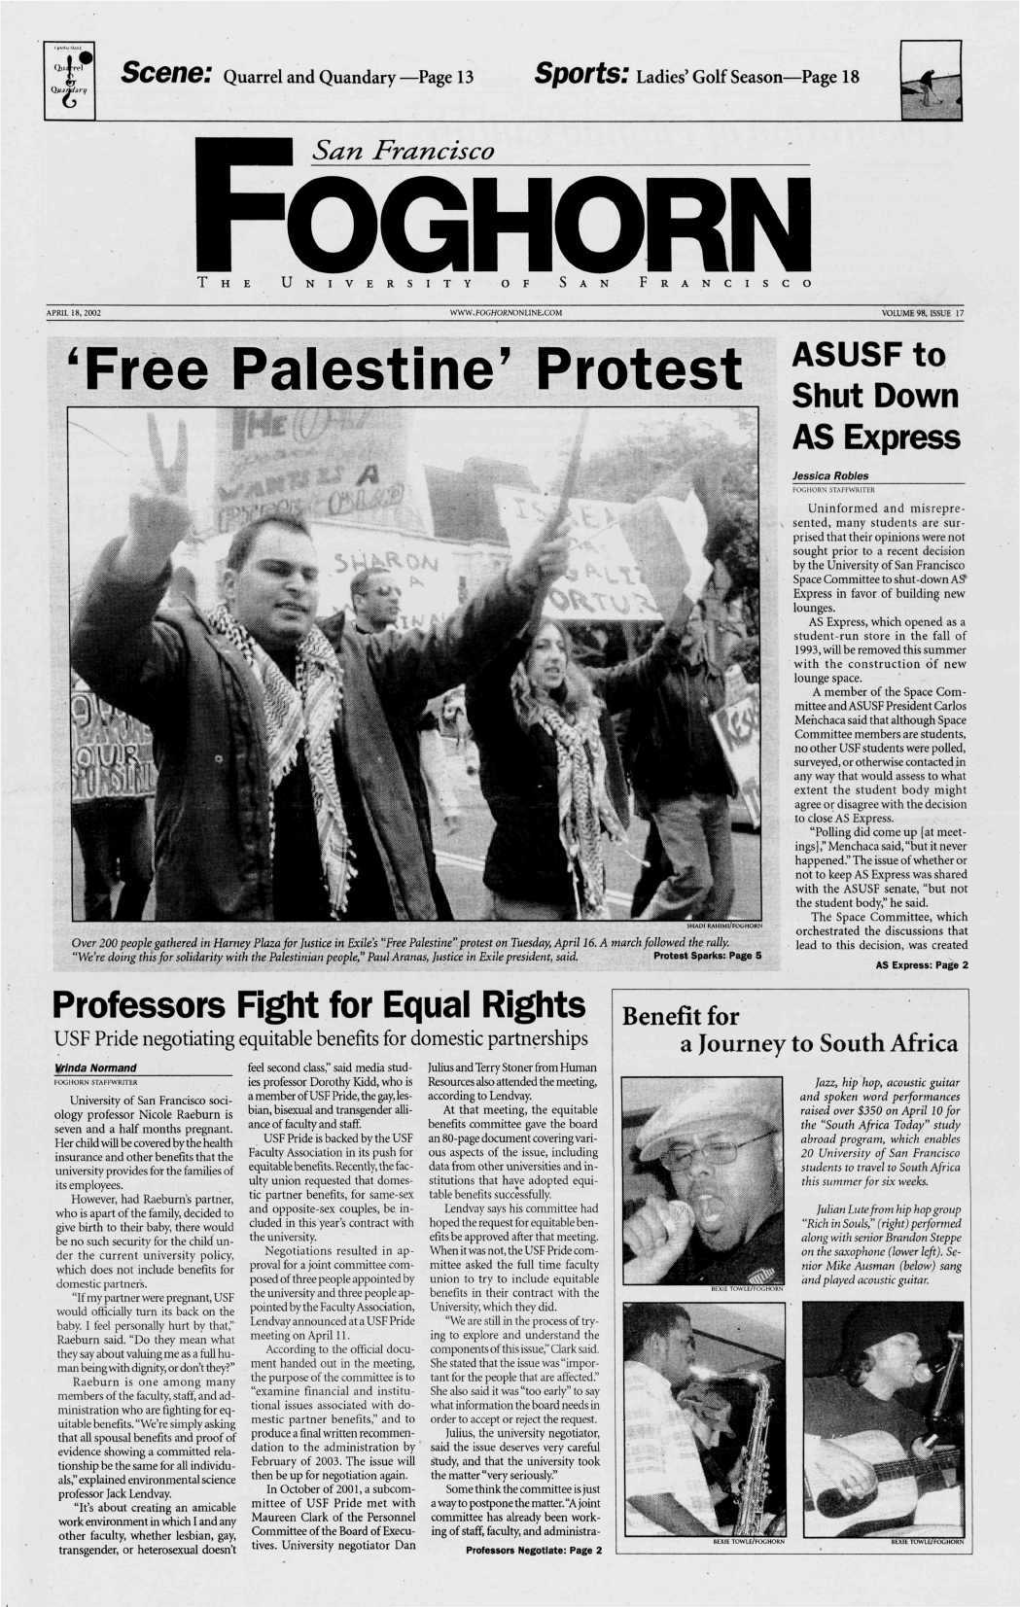 Tree Palestine' Protest Shut Down AS Express